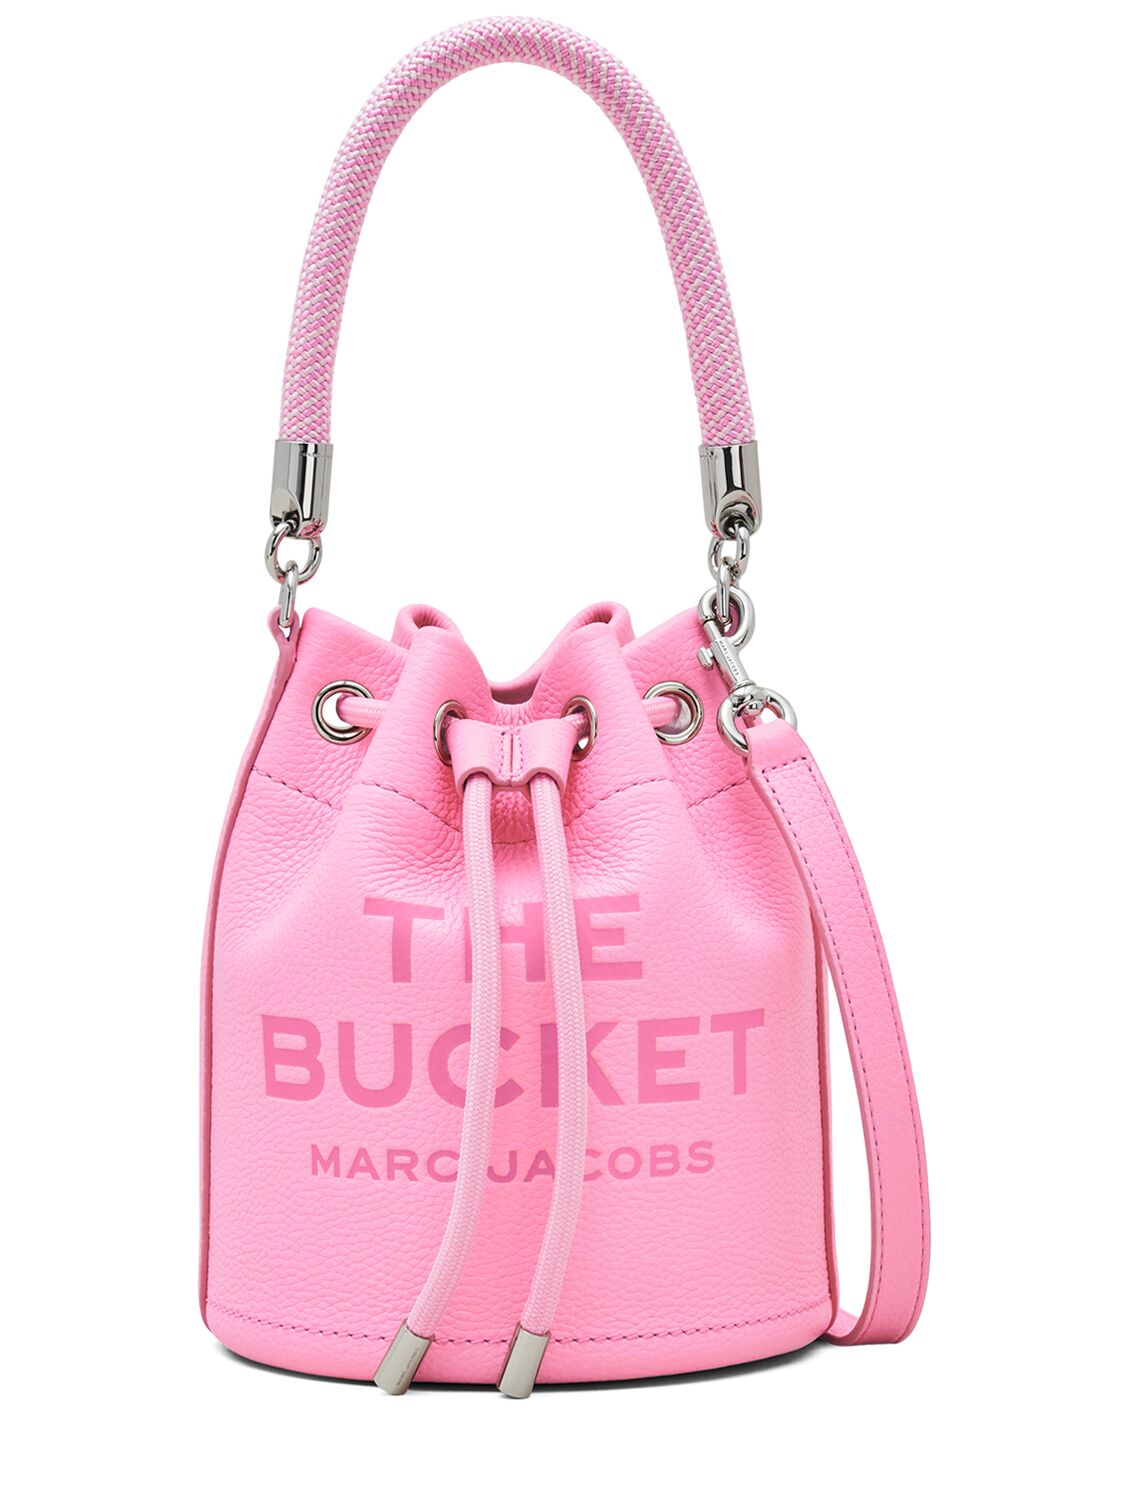 Marc Jacobs The Bucket Leather Bag In Fluro Candy Pin